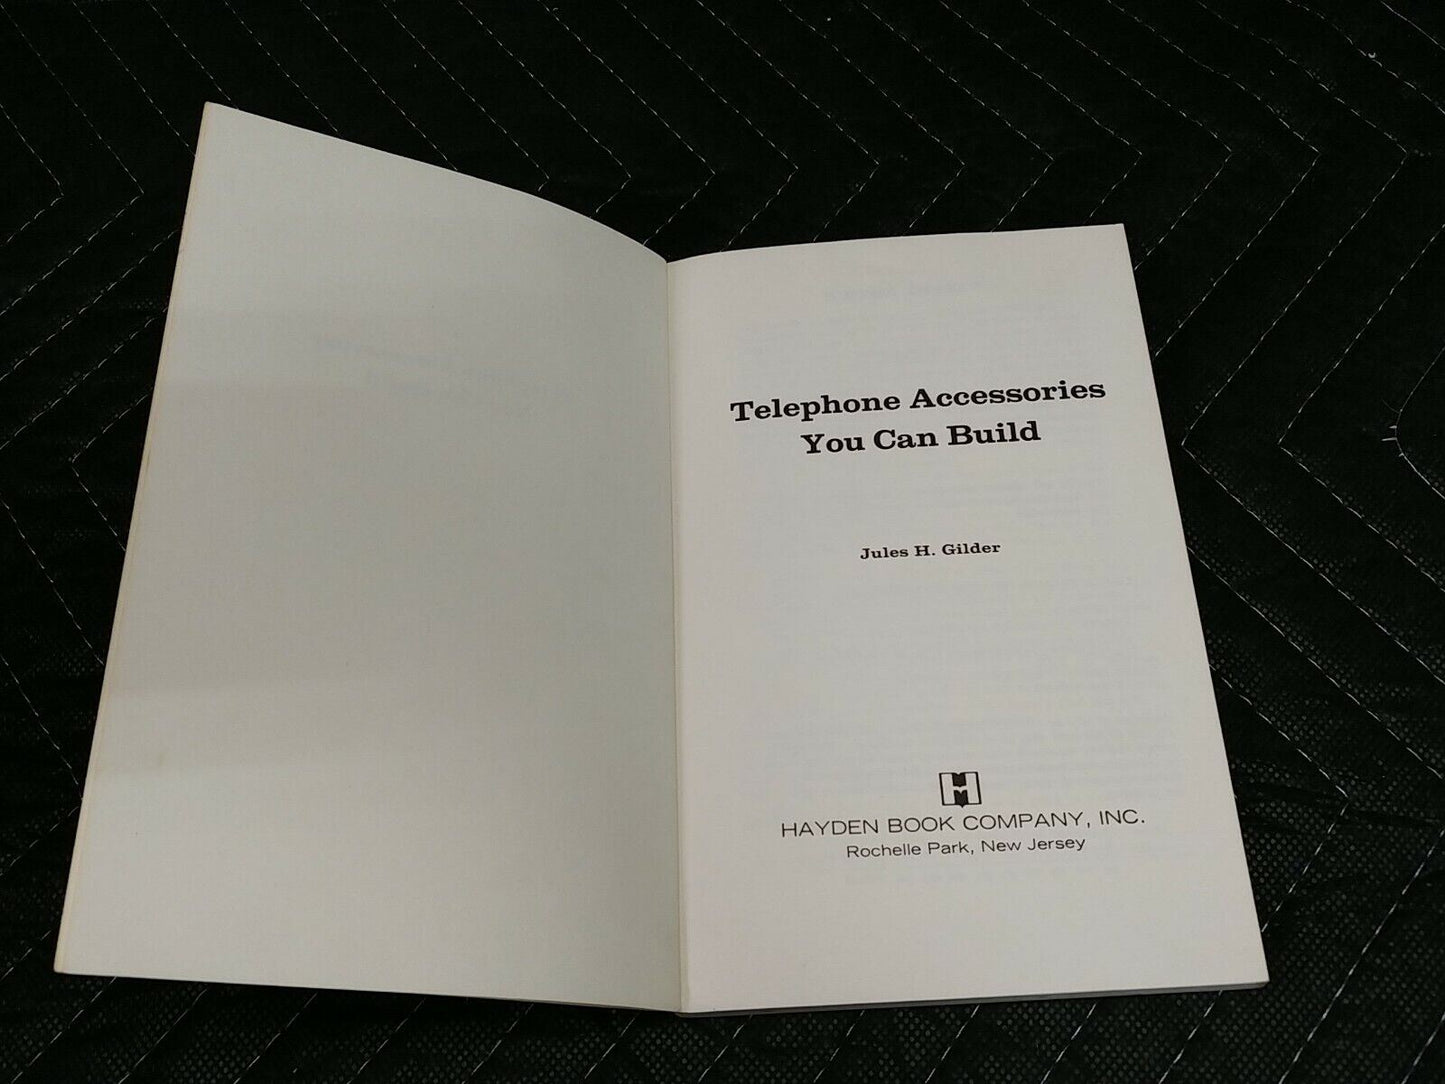 Telephone Accessories You Can Build by Jules H. Gilder